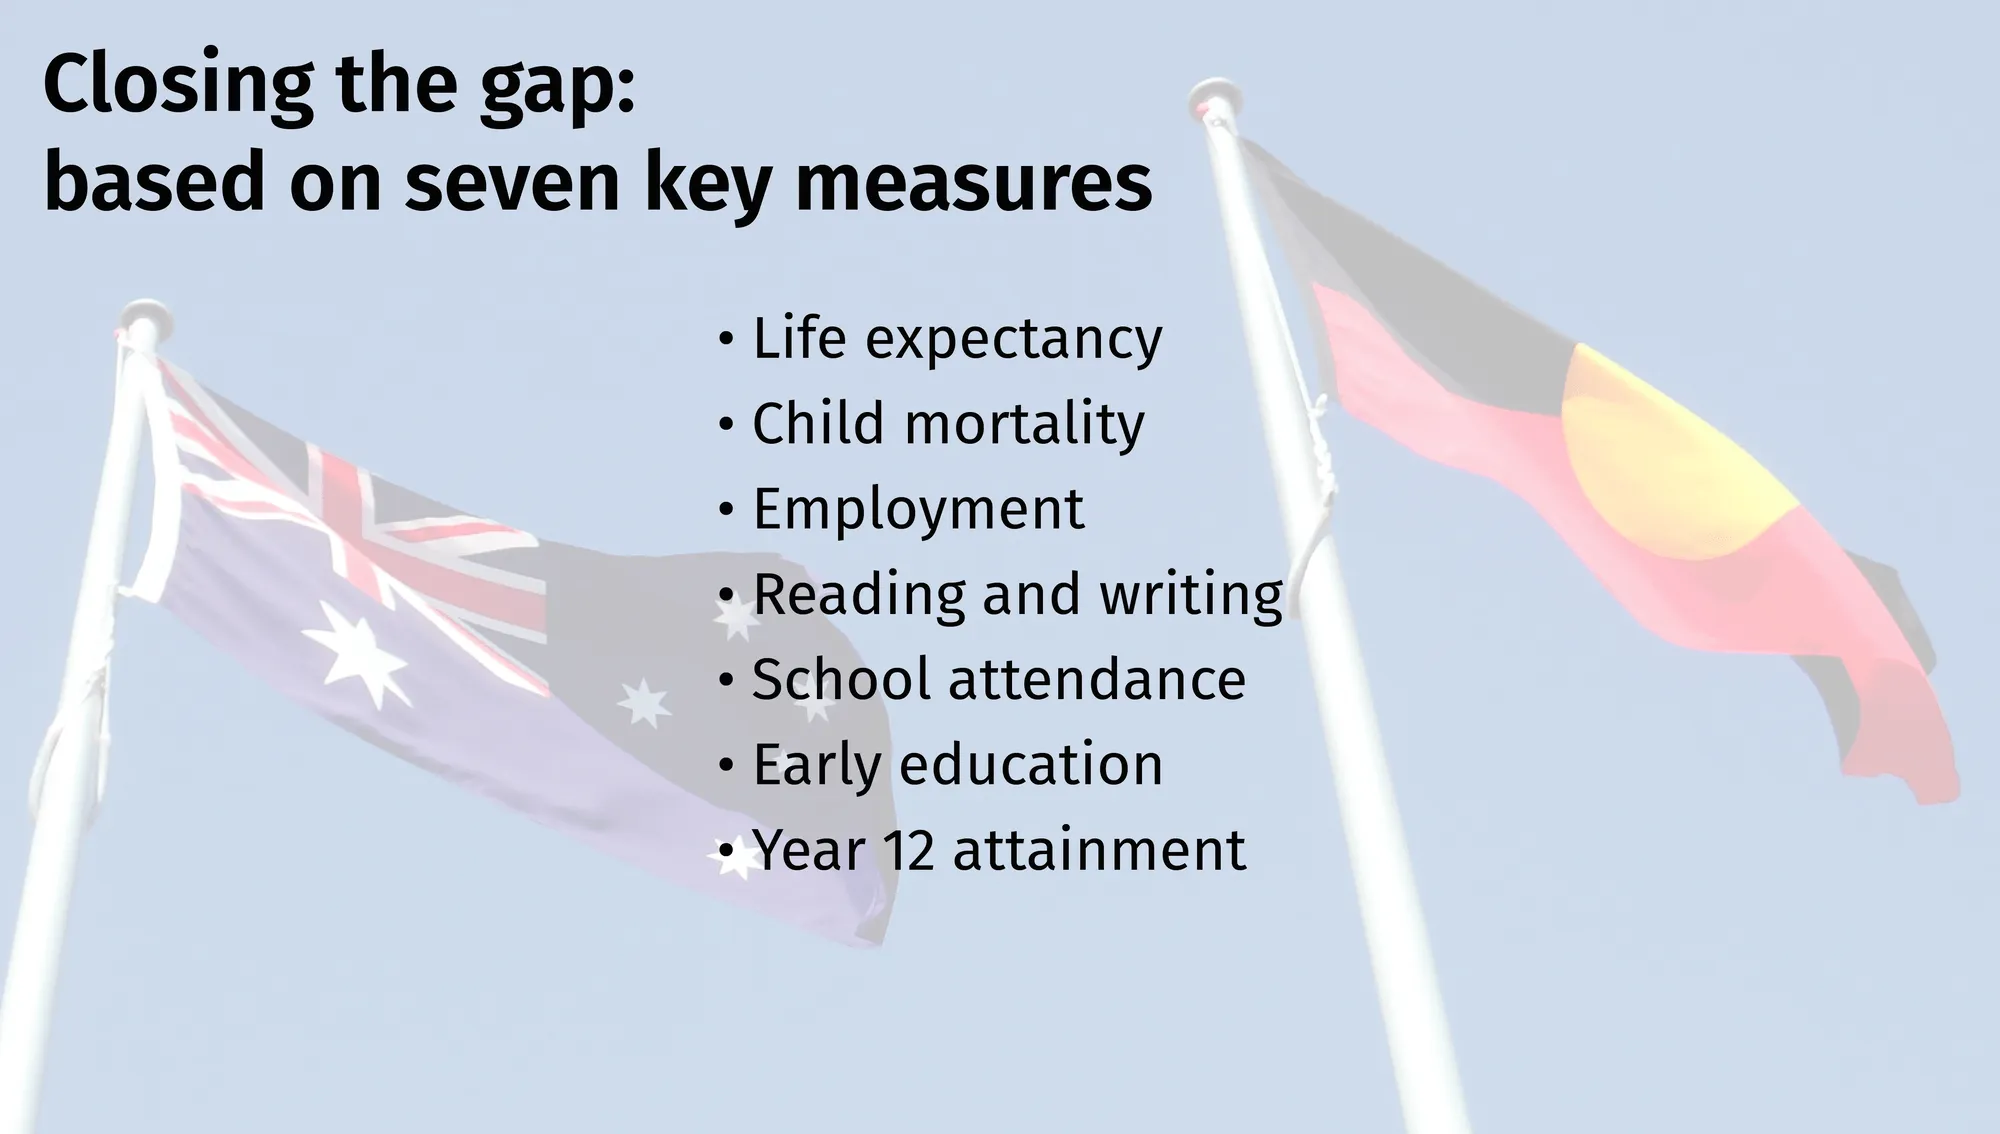 Closing the gap:
based on seven key measures